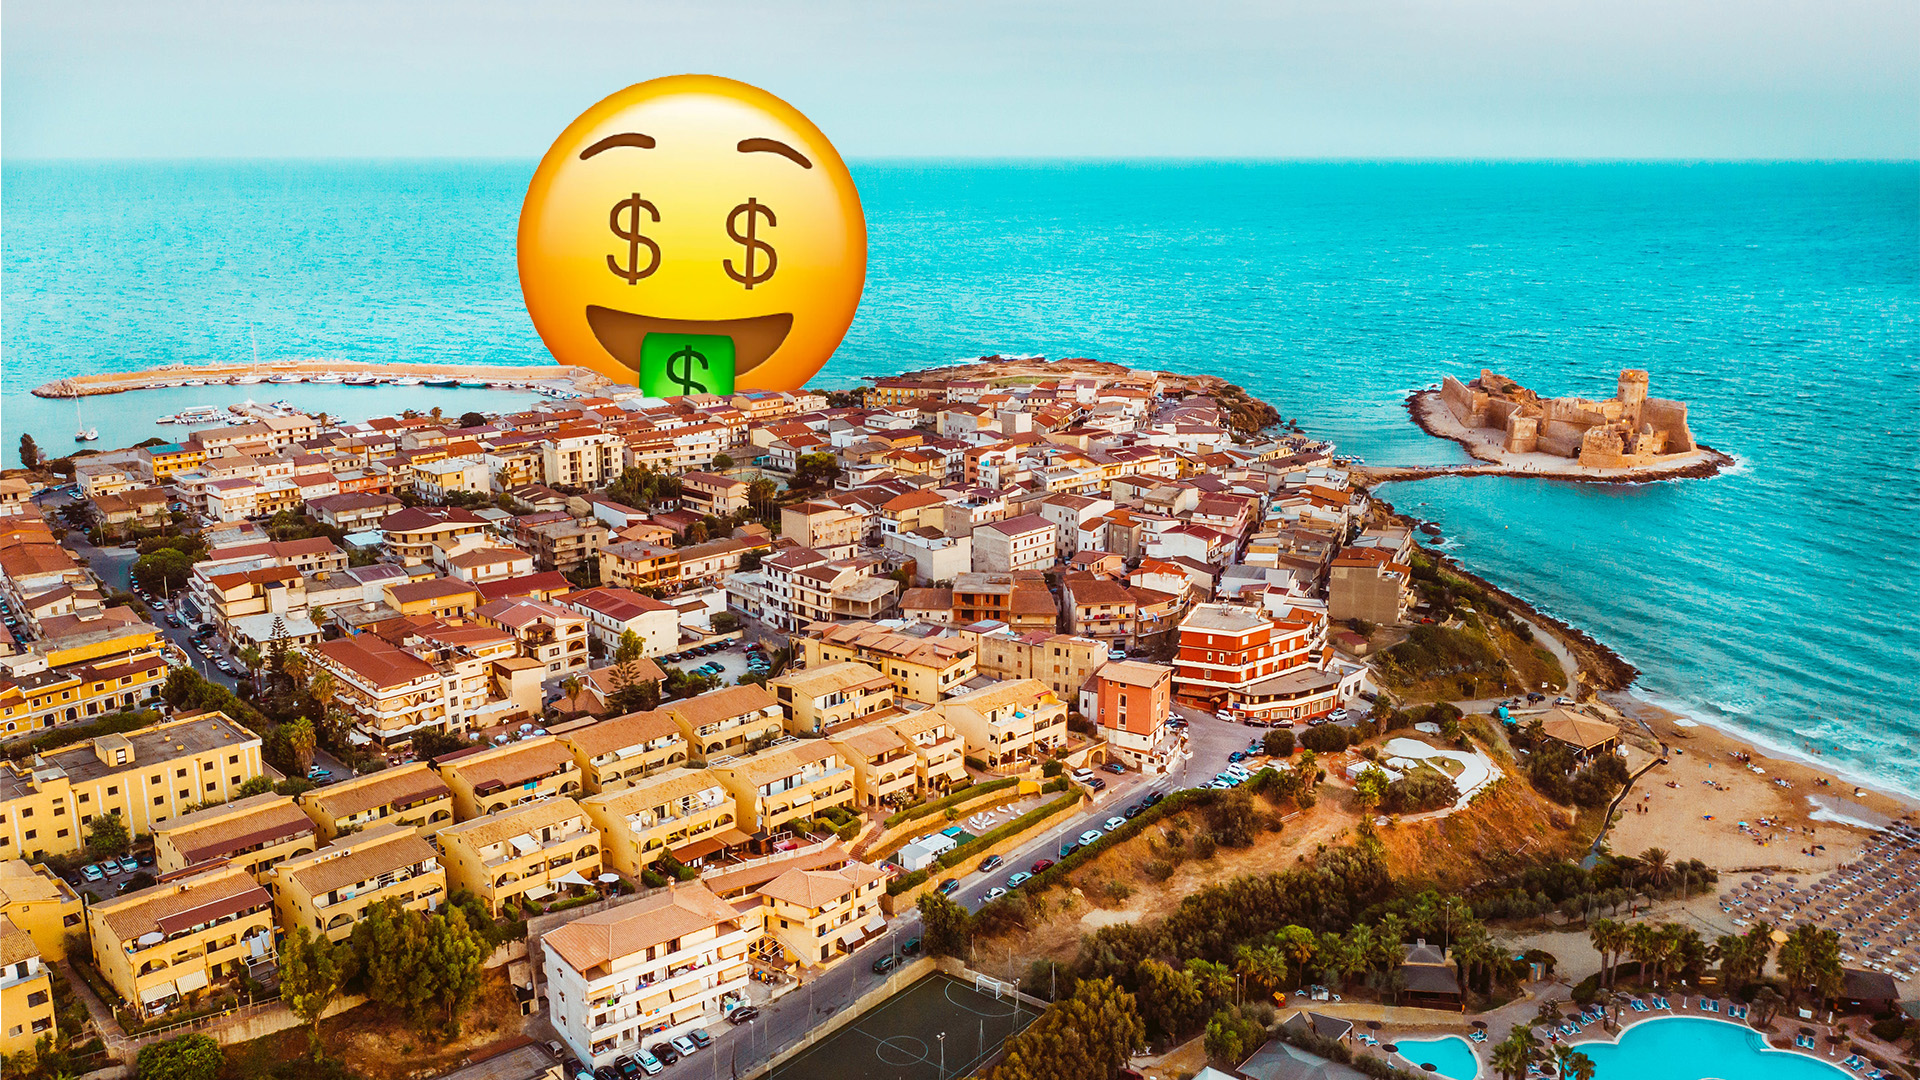 Beachside City of Calabria Offering Youth Almost €30,000 to Move There